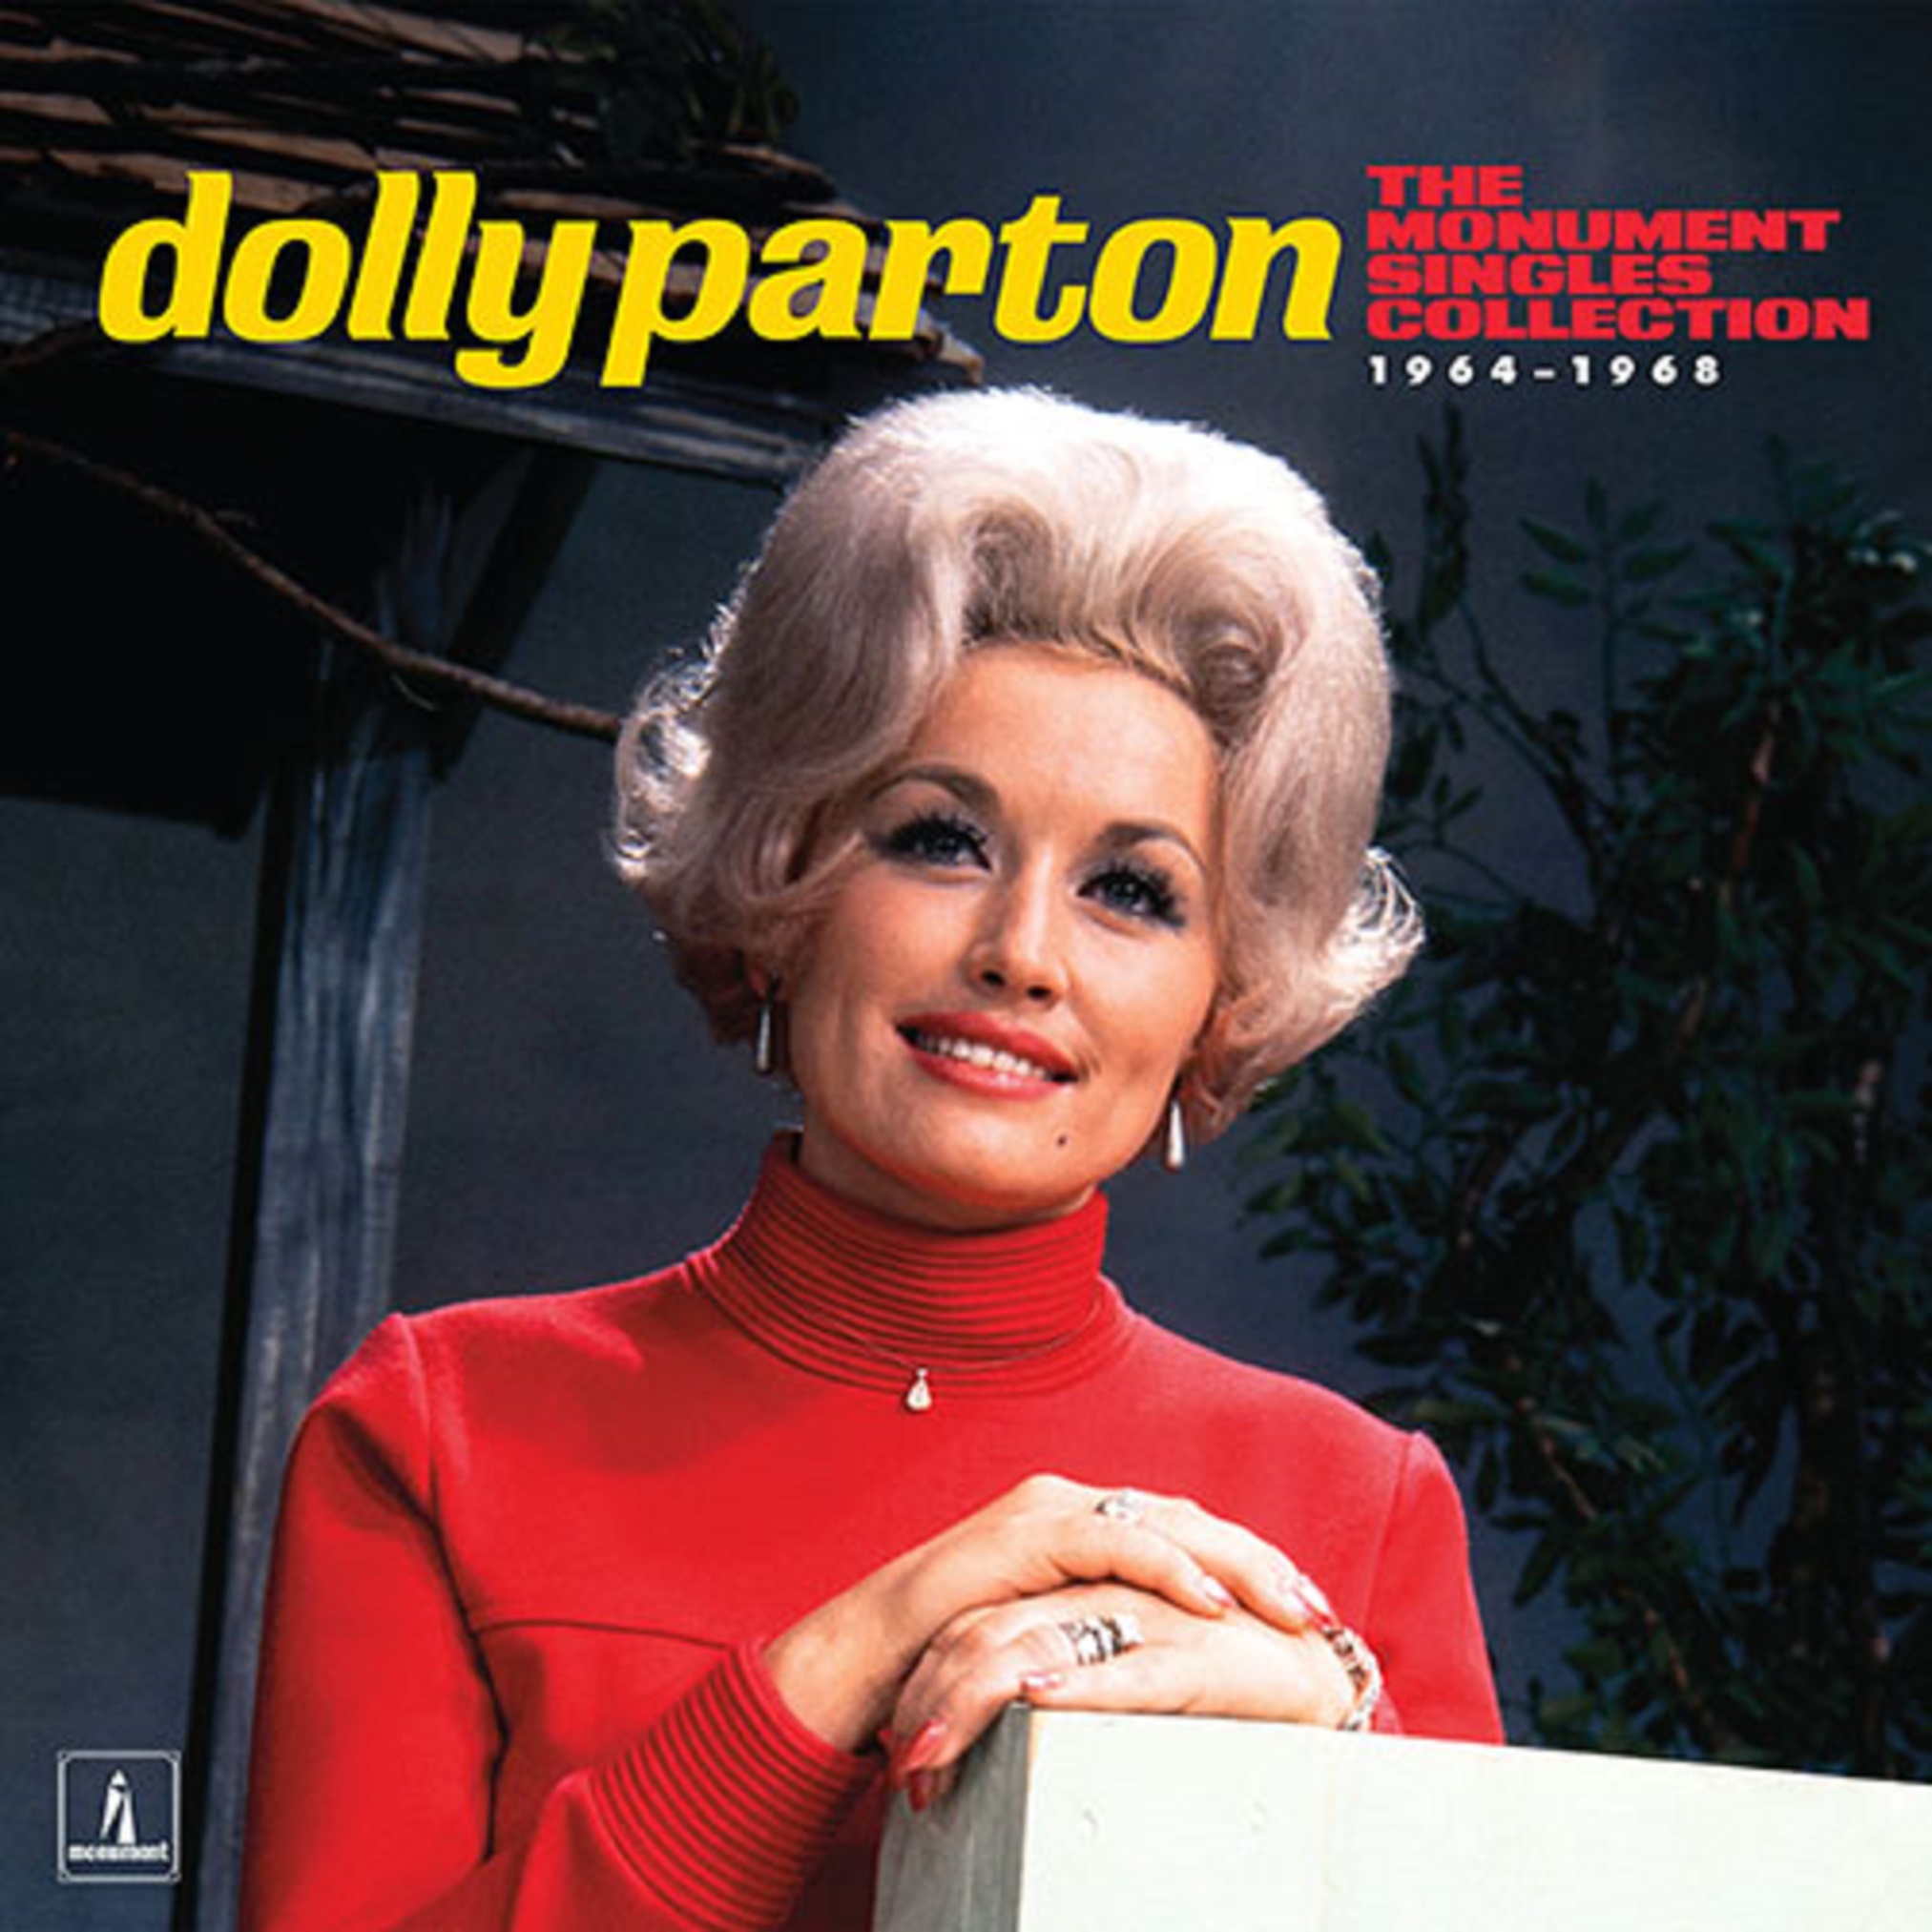 The monument singles collection - Vinyl | Dolly Parton